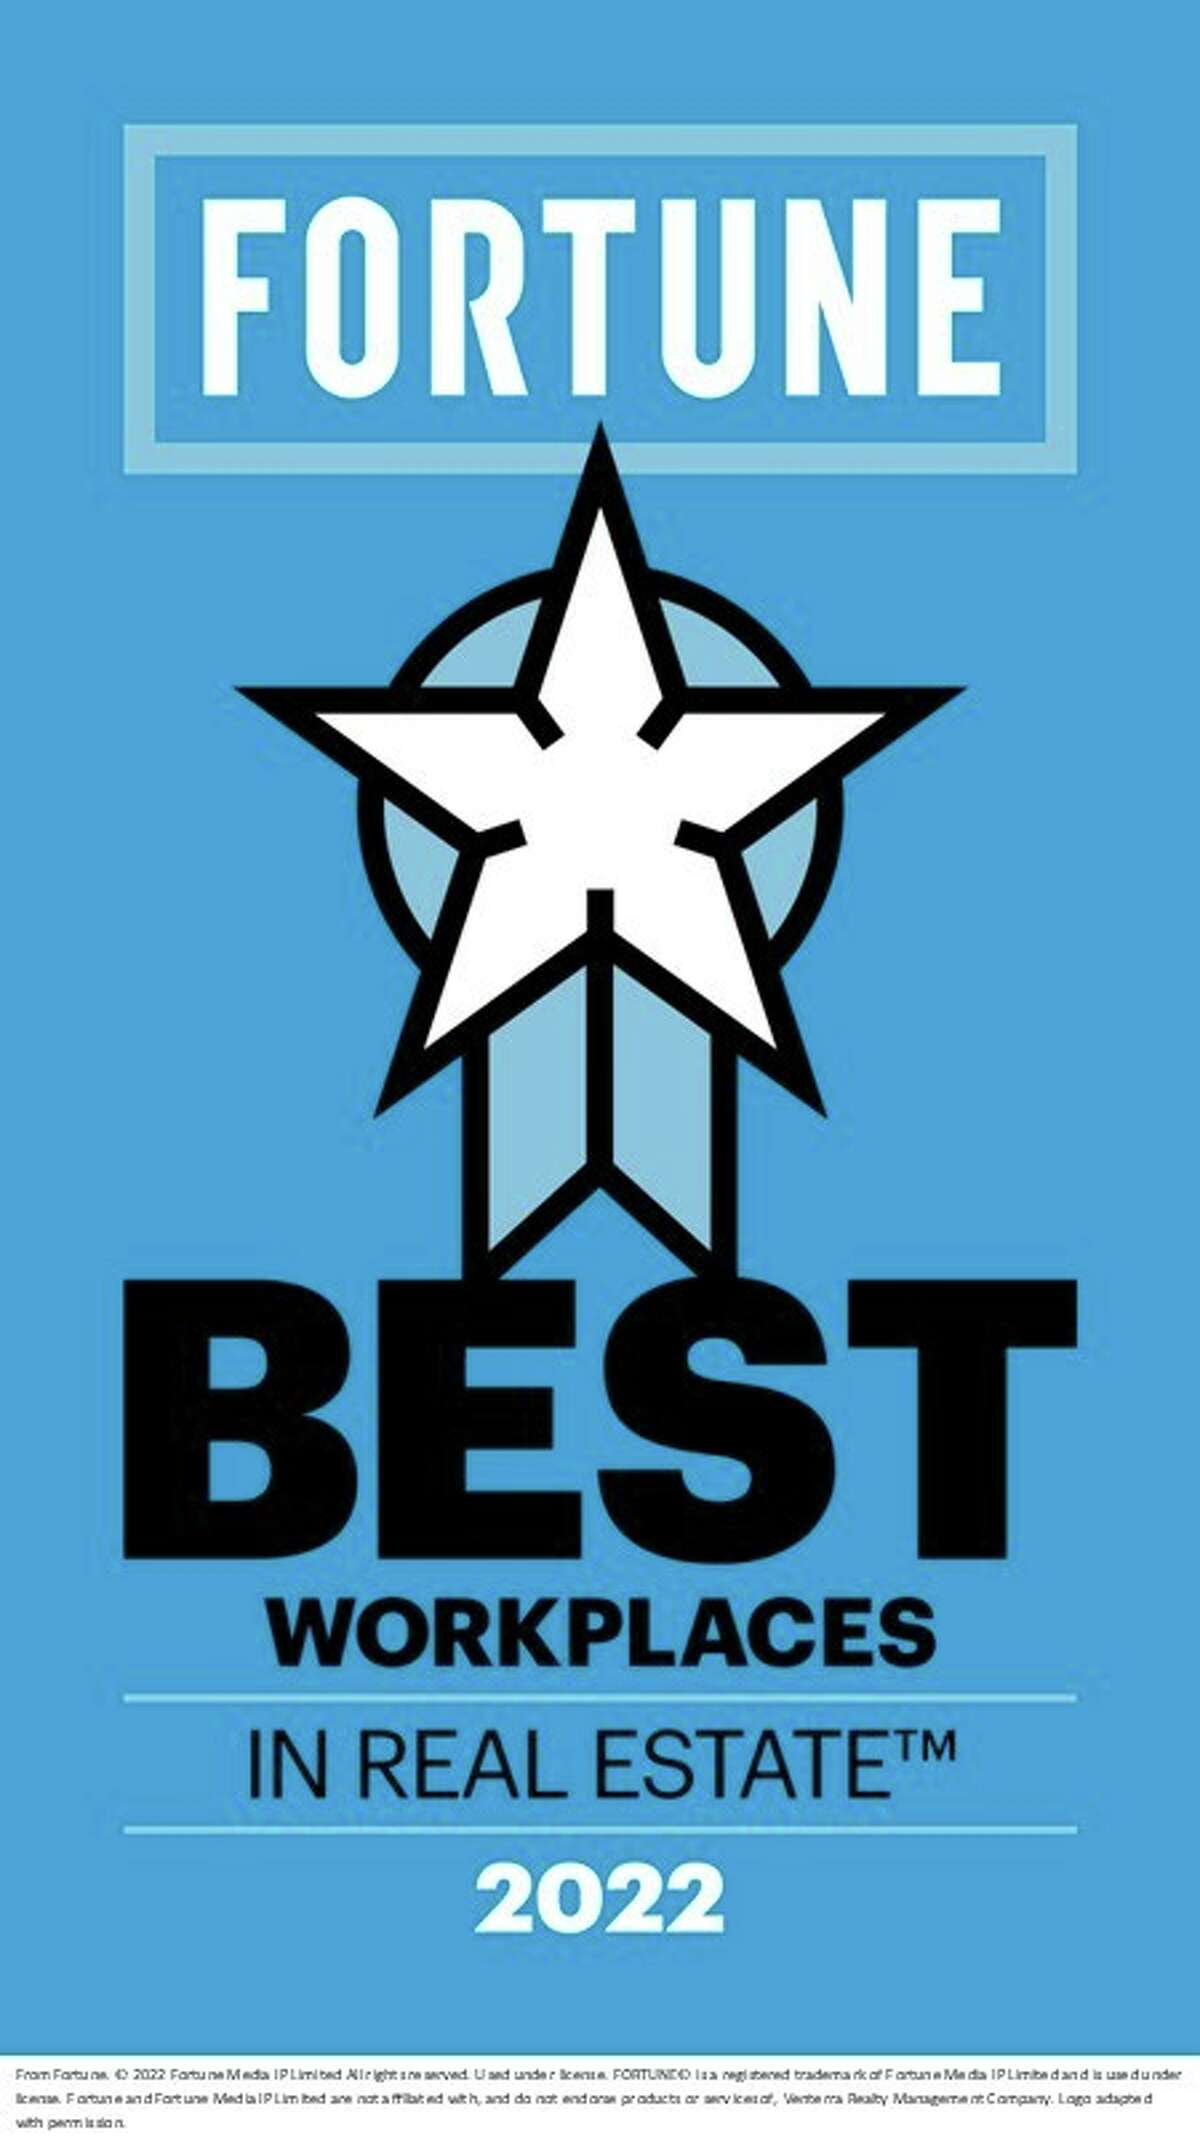 Fortune Best Workplaces in Real Estate